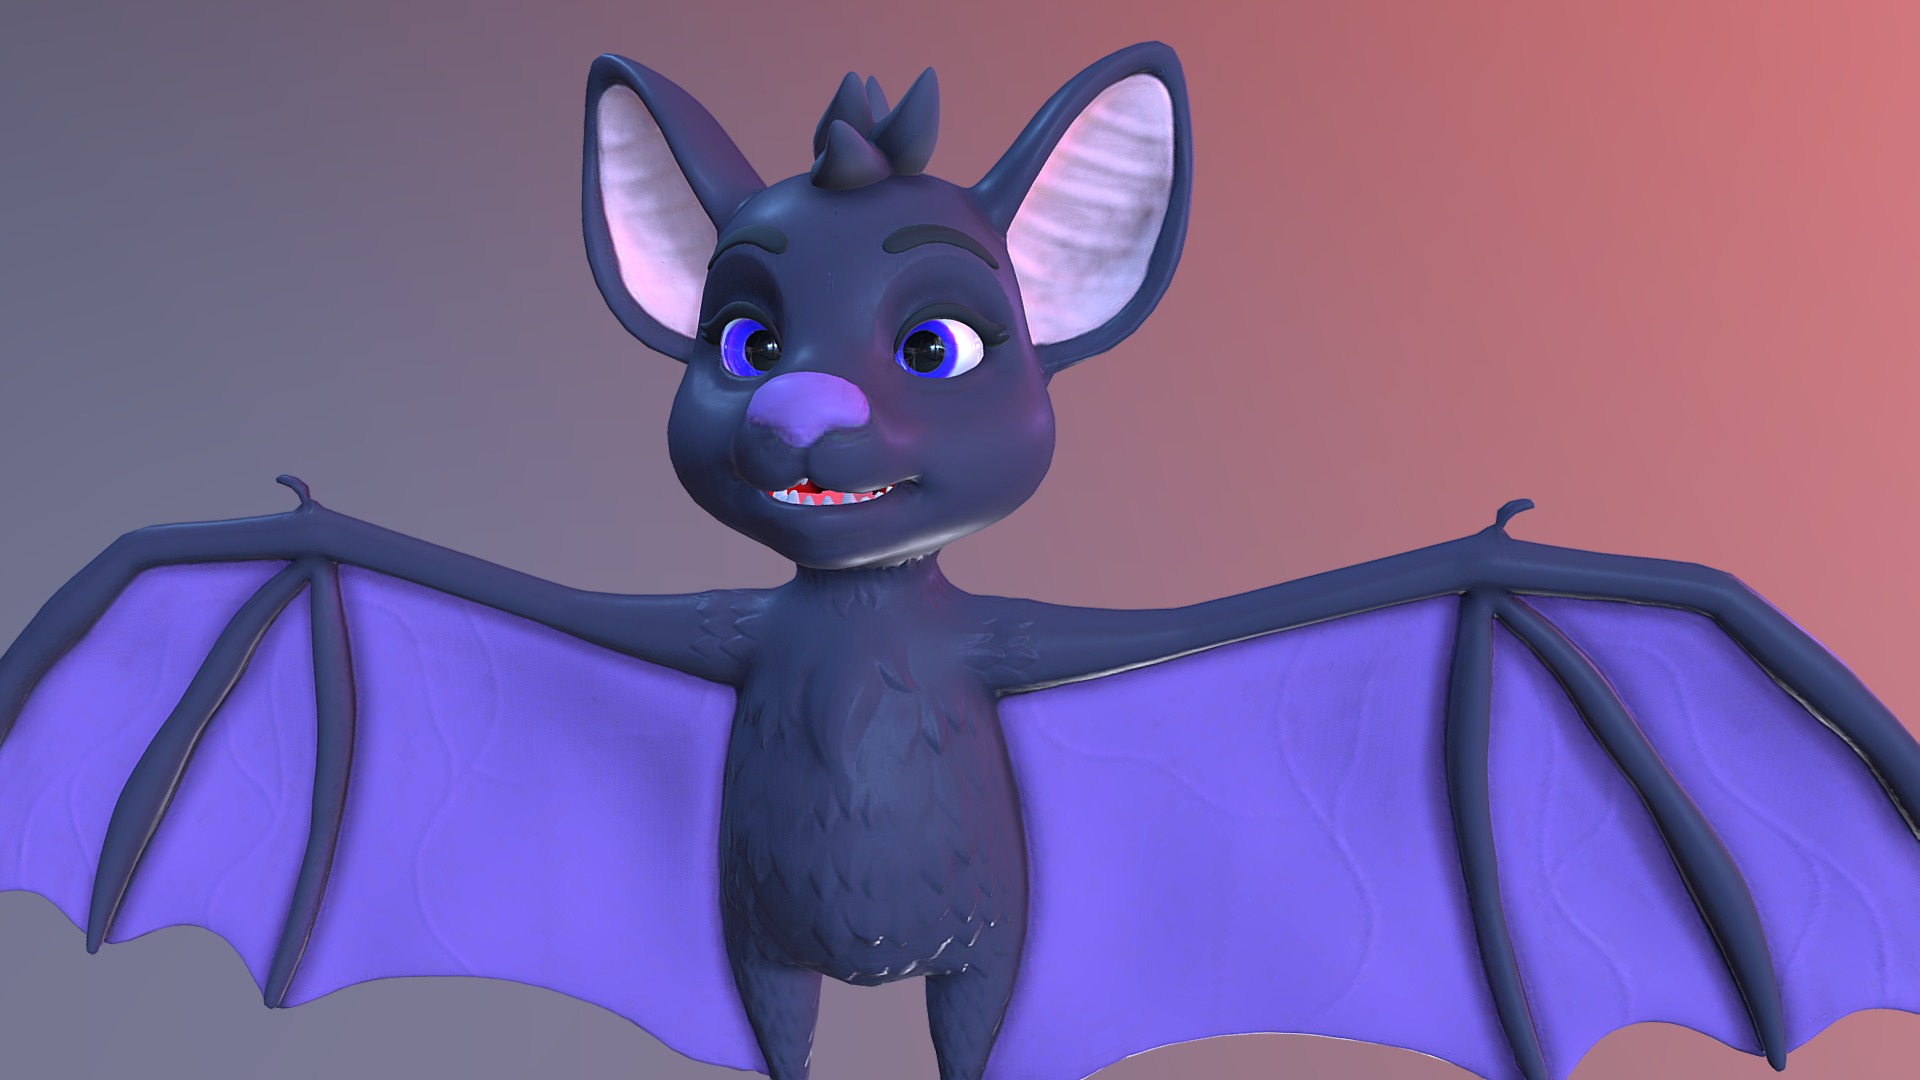 Little batty the bat was a old model i made when i was first learning zbrush, but i had gone recently back into my achives of old models and adapted him to a better more modern look from how it used to look a few years ago when i first created them.

so here is  batty! - Little batty the bat! - Buy Royalty Free 3D model by Lizzy Koopa (@LizzyKoopa) 3d model